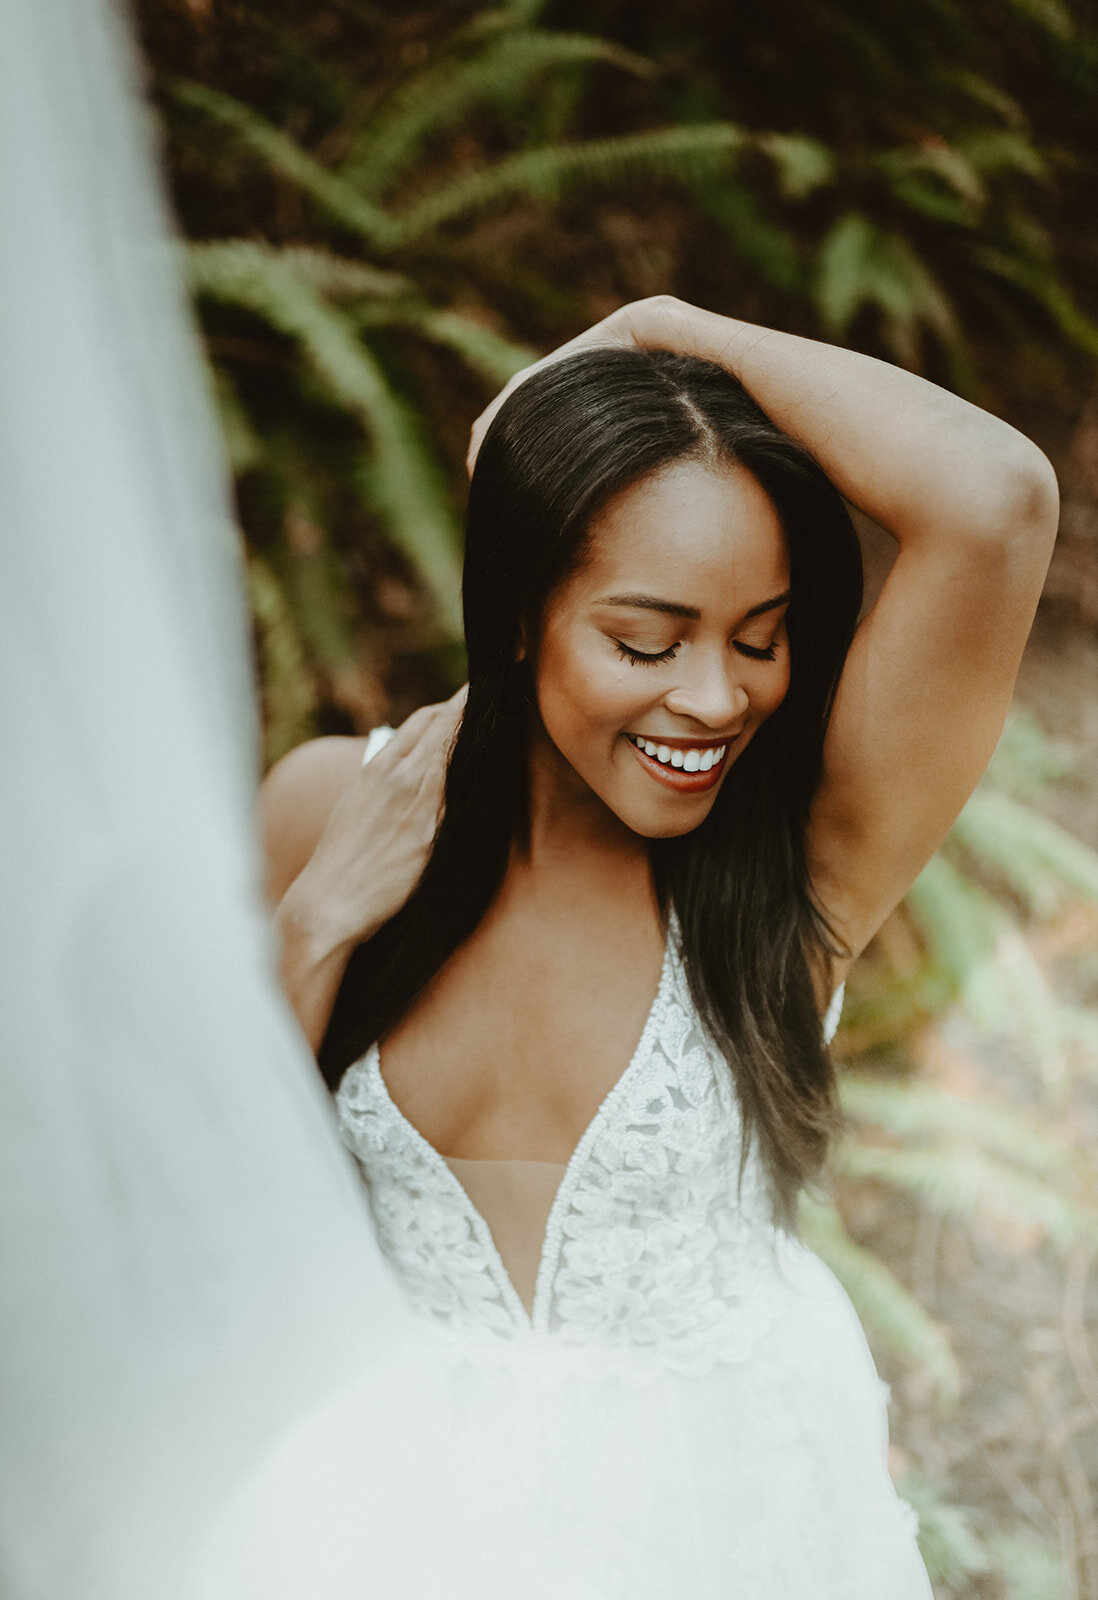  Styled bridal session with Emily Noelle Photography in the Made With Love River Wedding dress at the Hoyt Arboretum in Portland, Oregon 